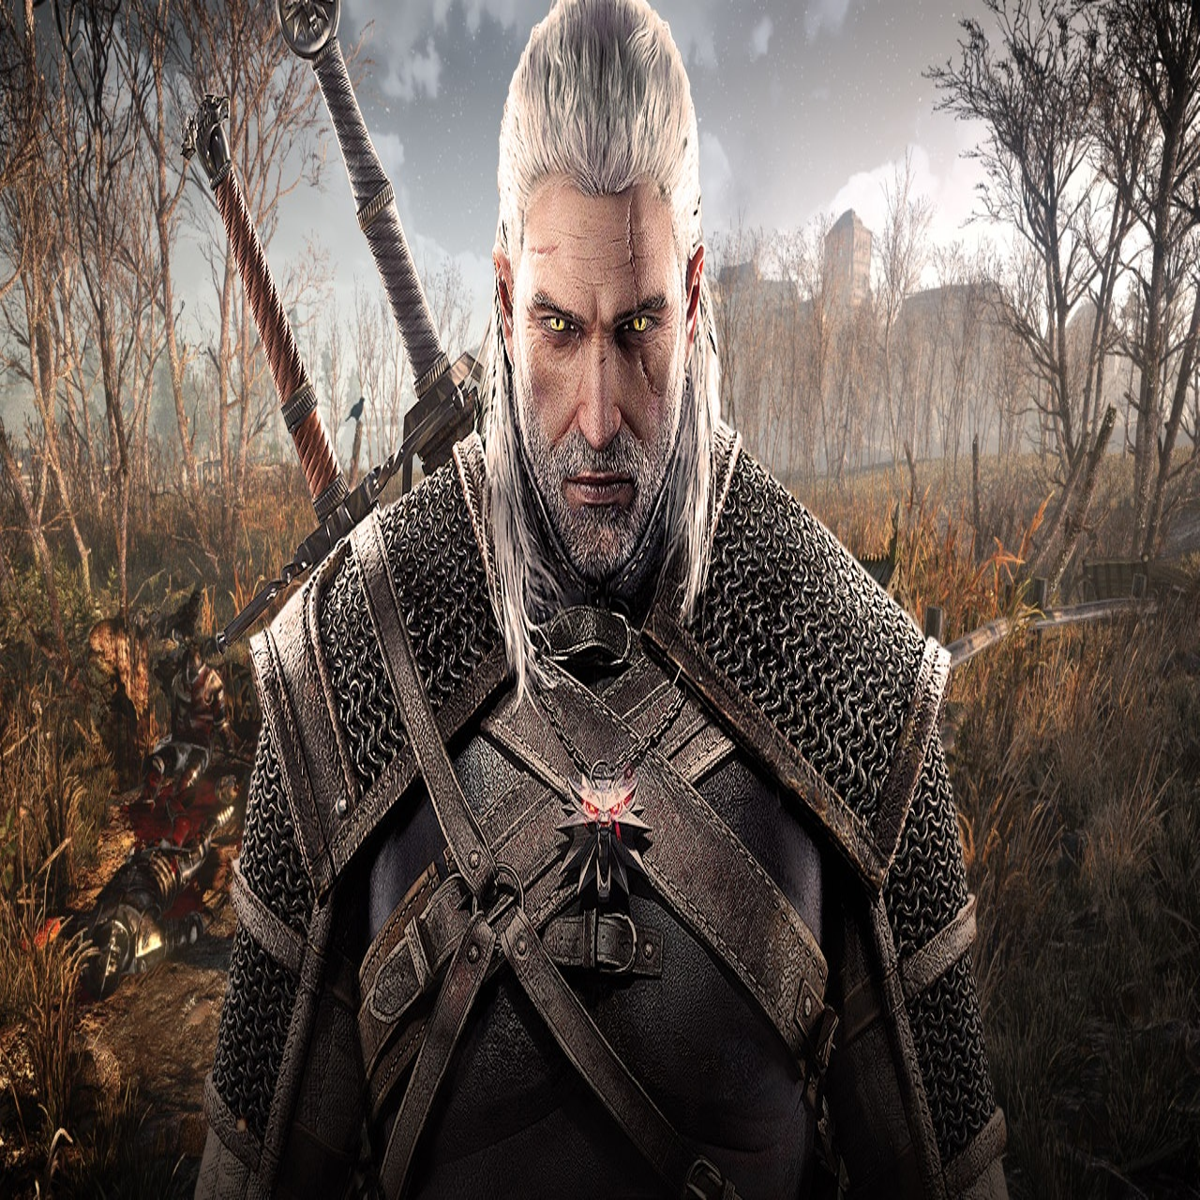 https://assetsio.reedpopcdn.com/witcher-3-switch-deal.jpg?width=1200&height=1200&fit=crop&quality=100&format=png&enable=upscale&auto=webp